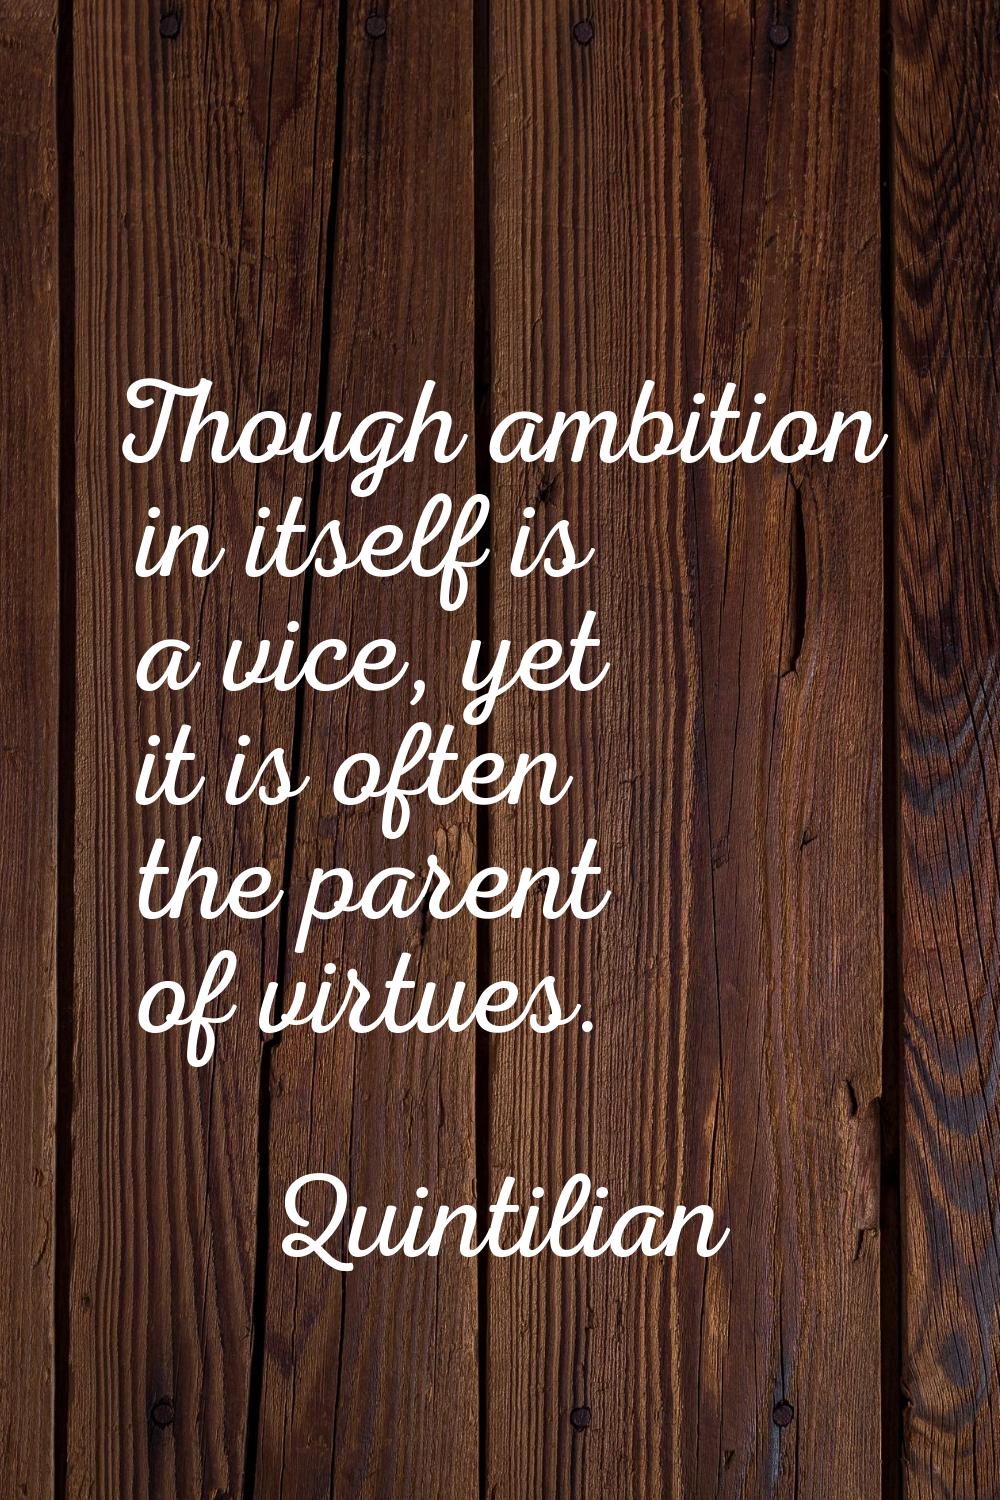 Though ambition in itself is a vice, yet it is often the parent of virtues.